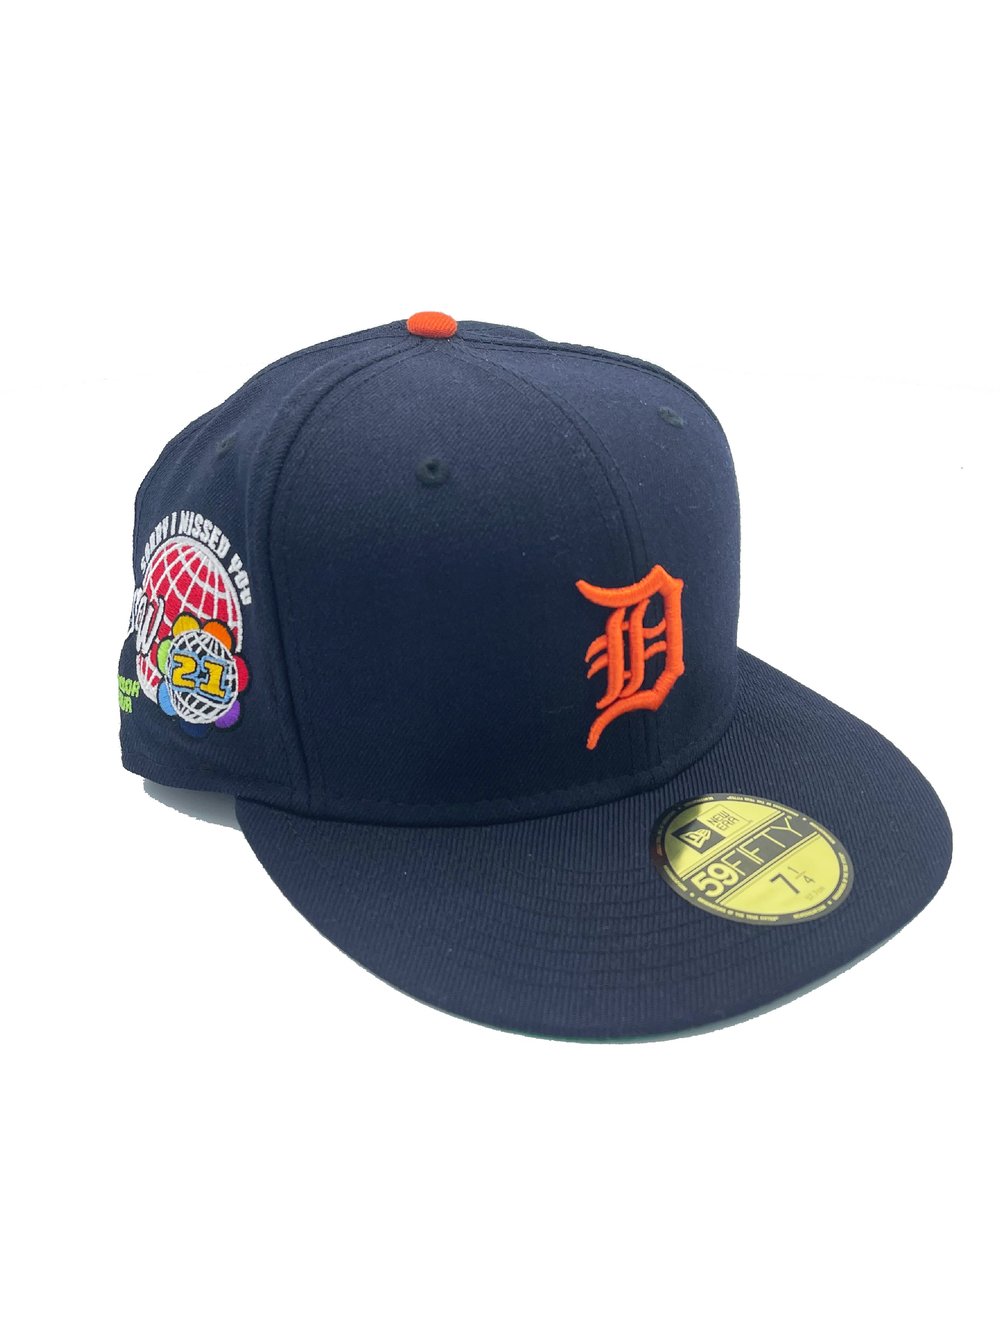 Image of  Detriot Tigers - Sorry I Missed You